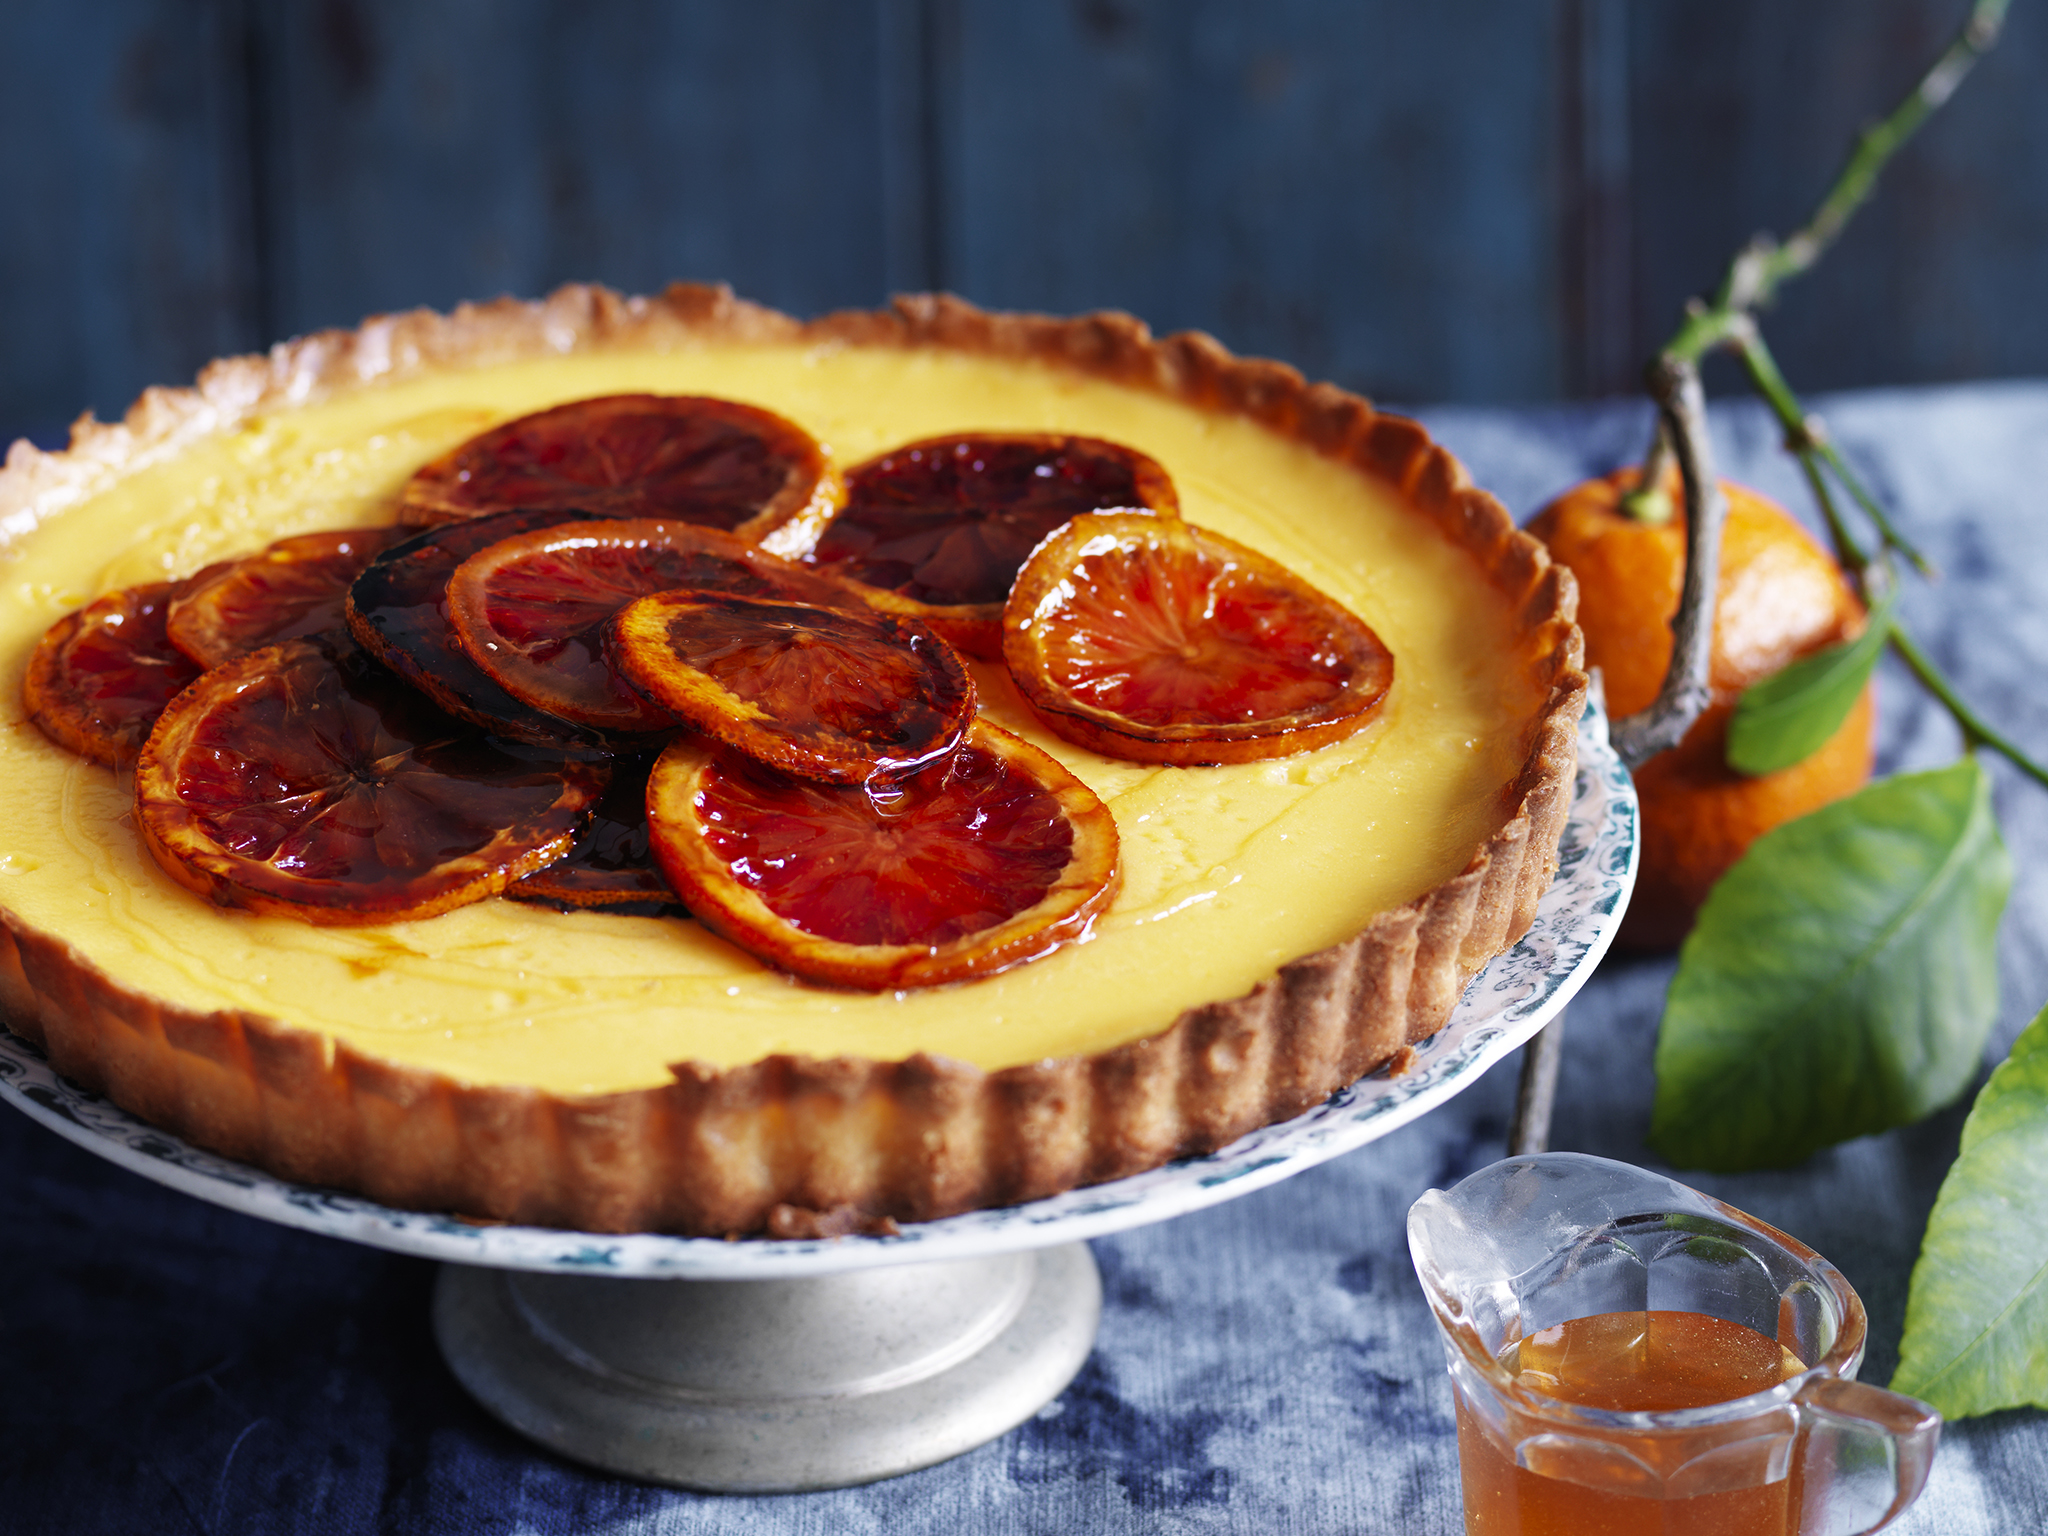 tangelo tart with candied blood oranges